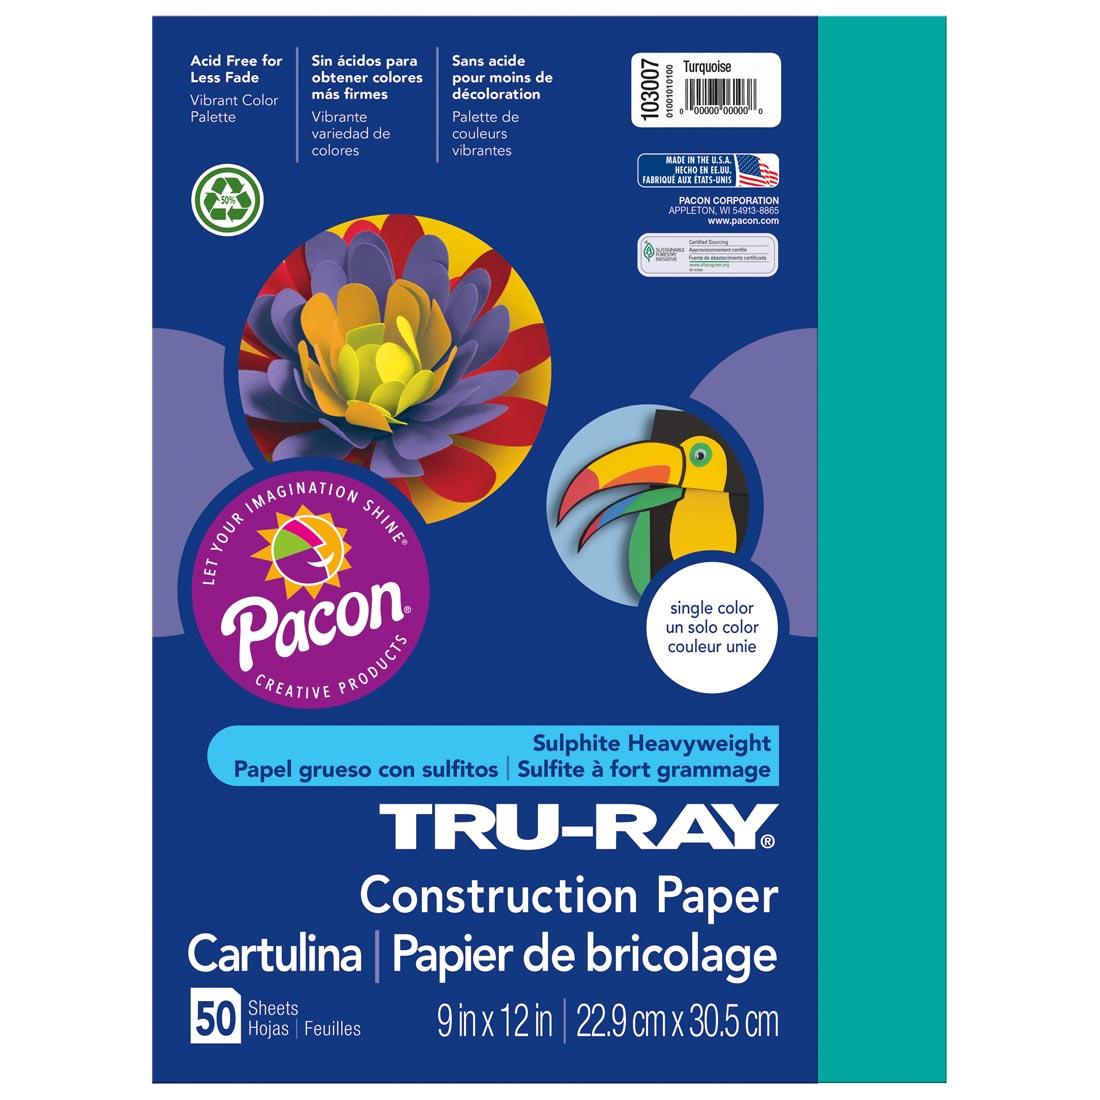 Tru-Ray Turquoise Construction Paper